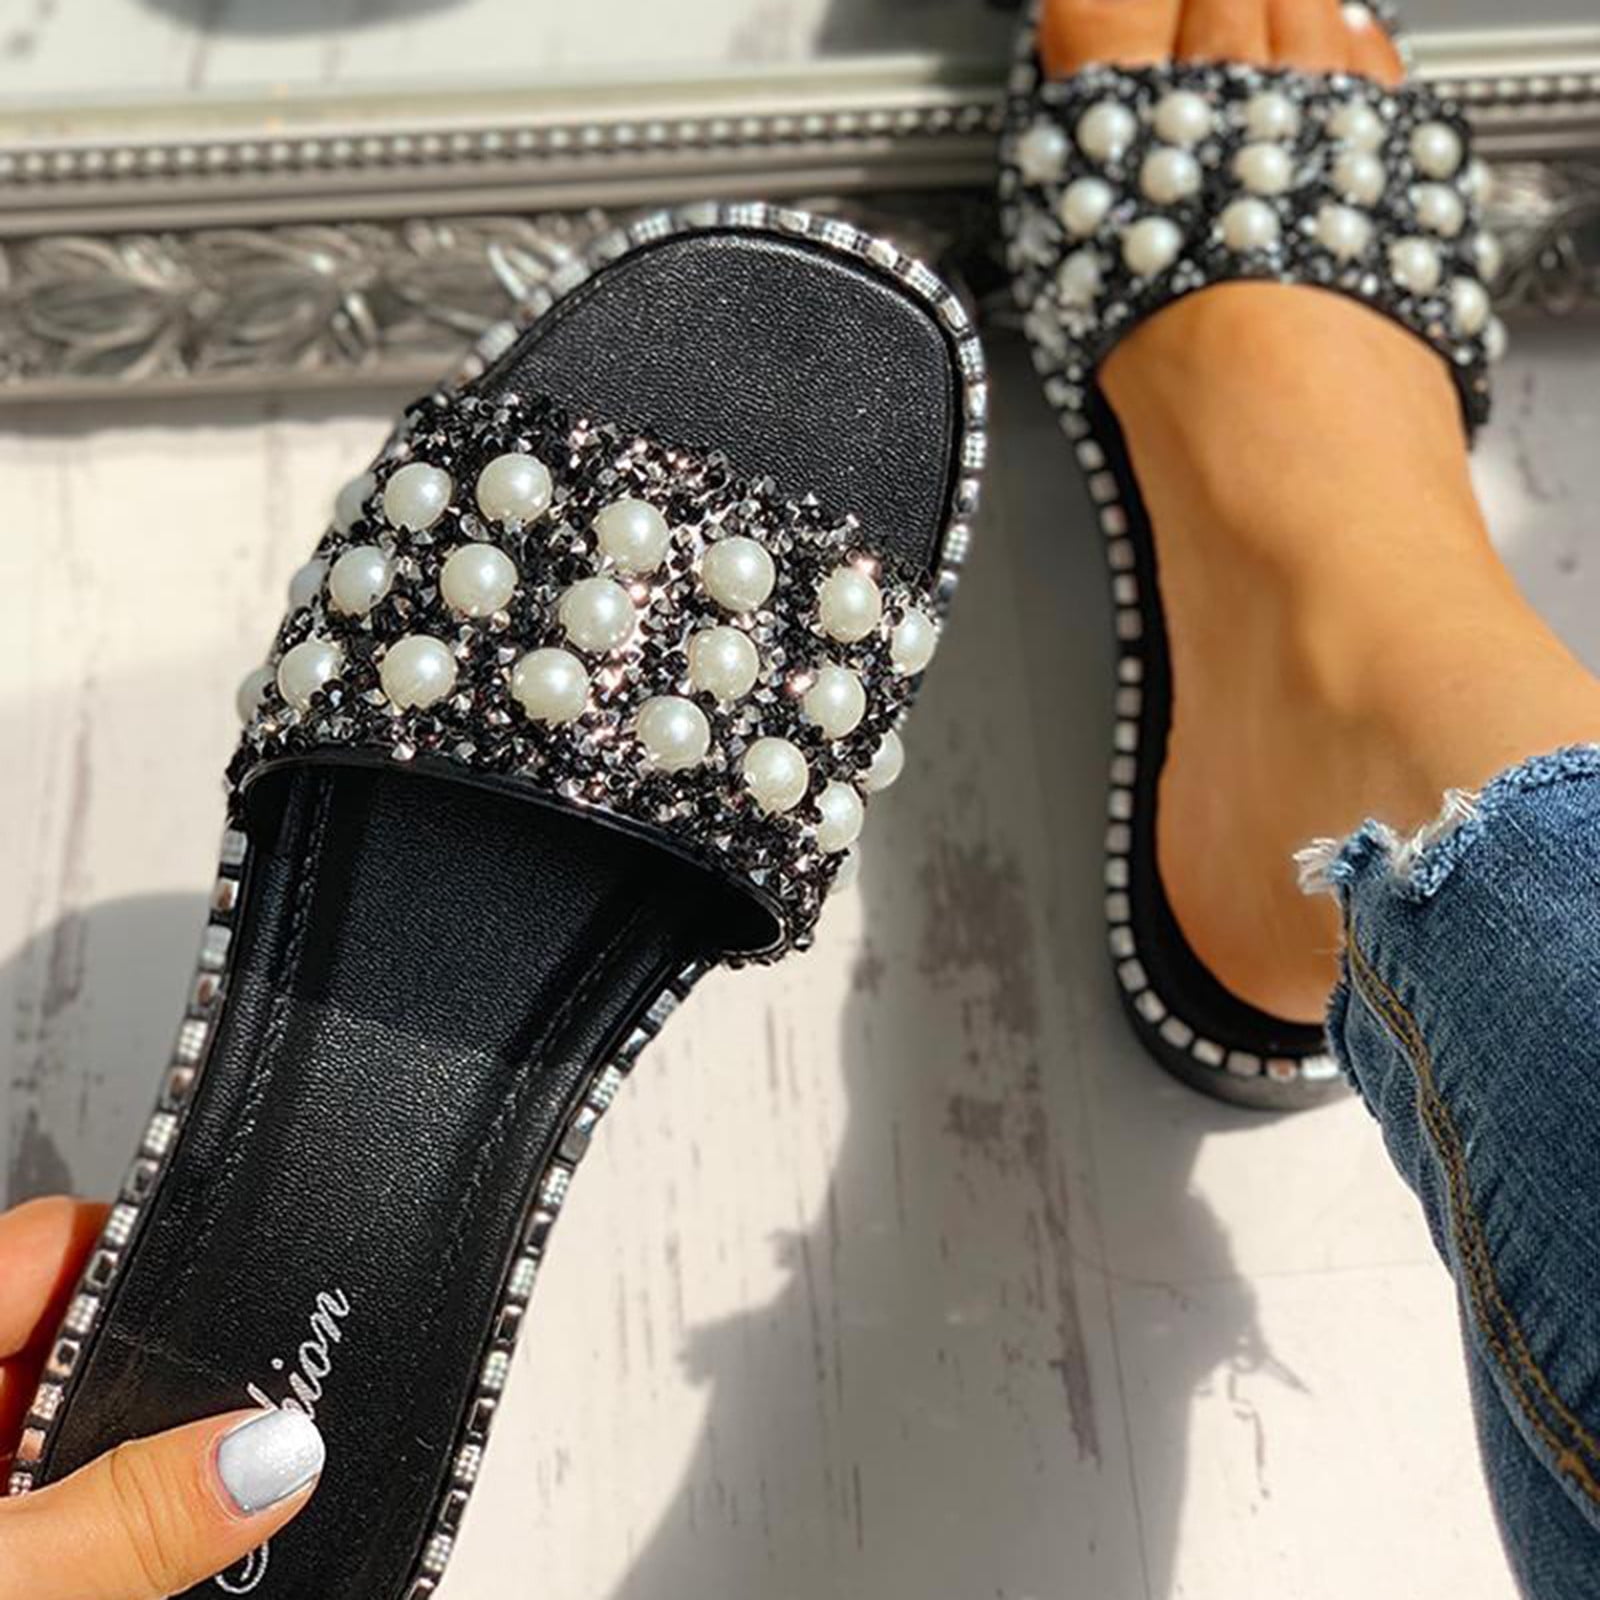 Private space Summer Women Shoes Women Sandals Rhinestone Pearl Flip Flops New Flat Sandals Soft Bottom Ladies Shoes